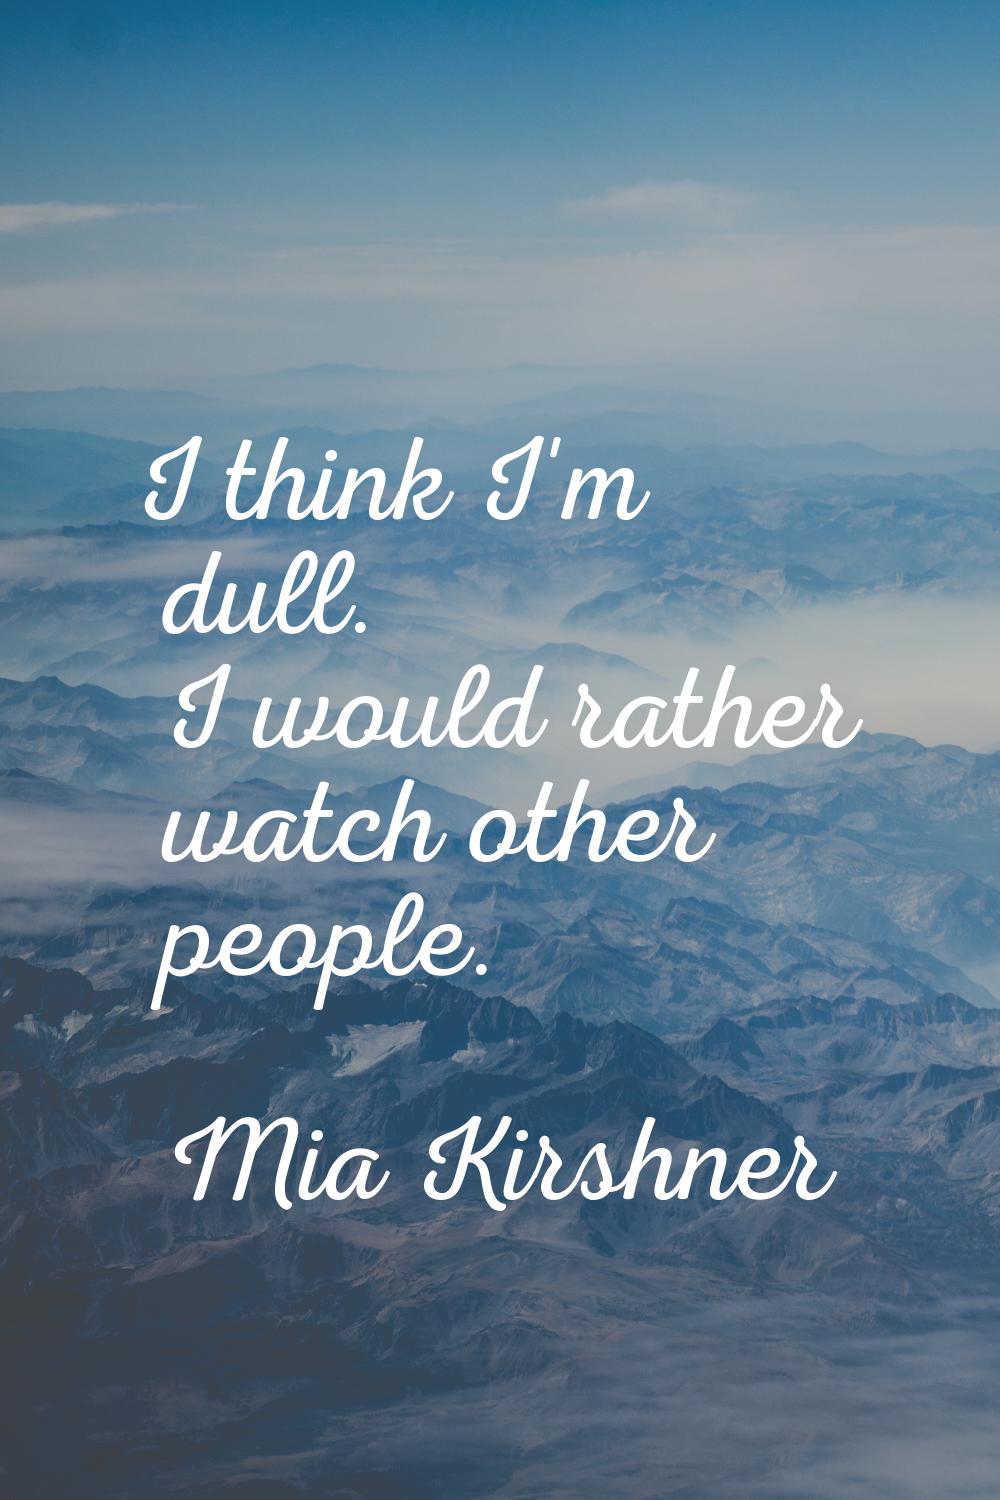 I think I'm dull. I would rather watch other people.